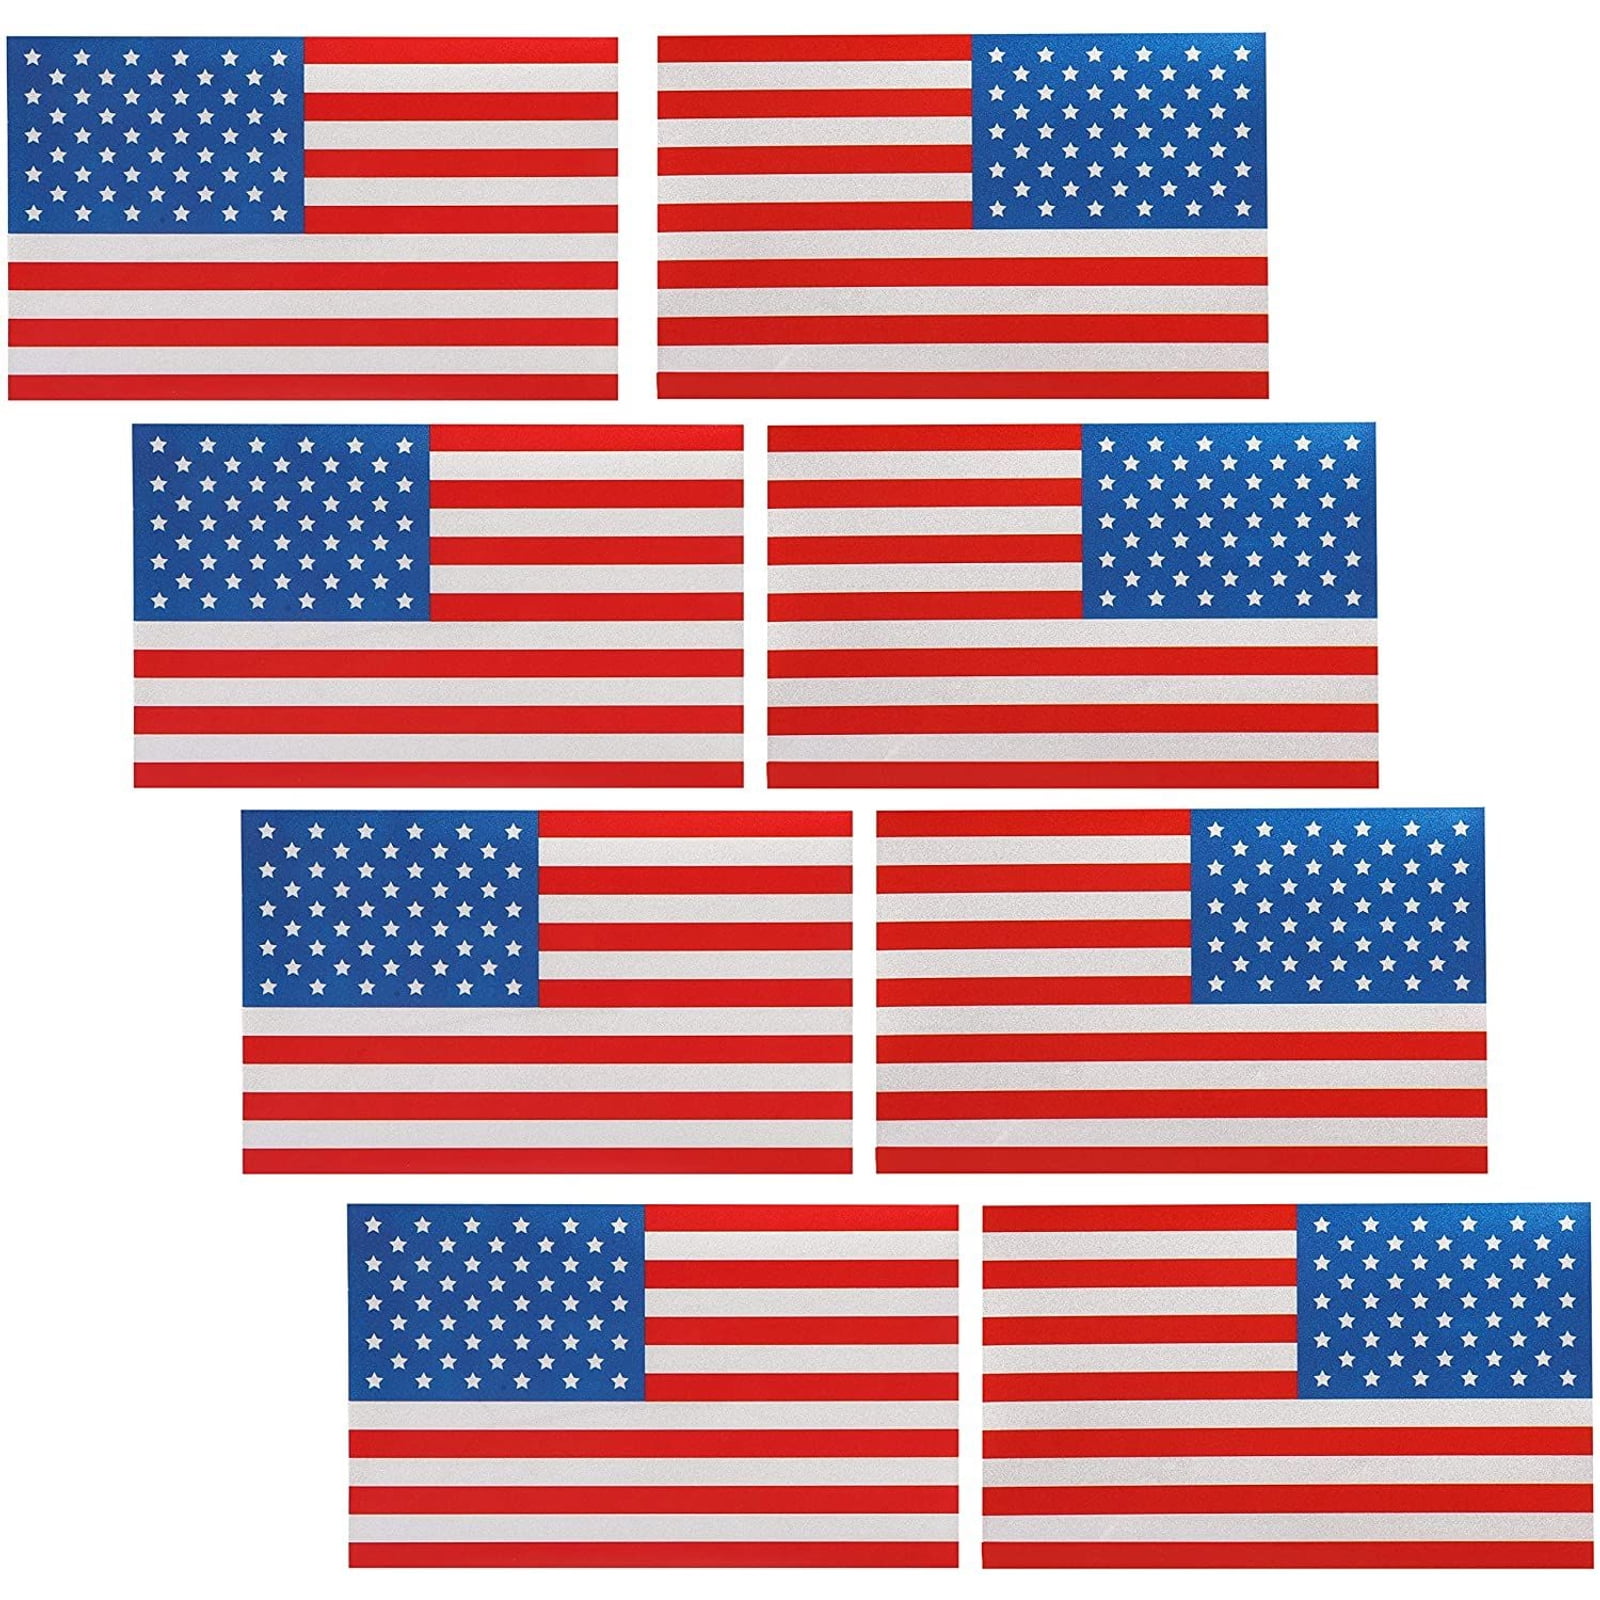 USA United States of America FLAG GIANT WALL STICKER decal car art vinyl 5 sizes 